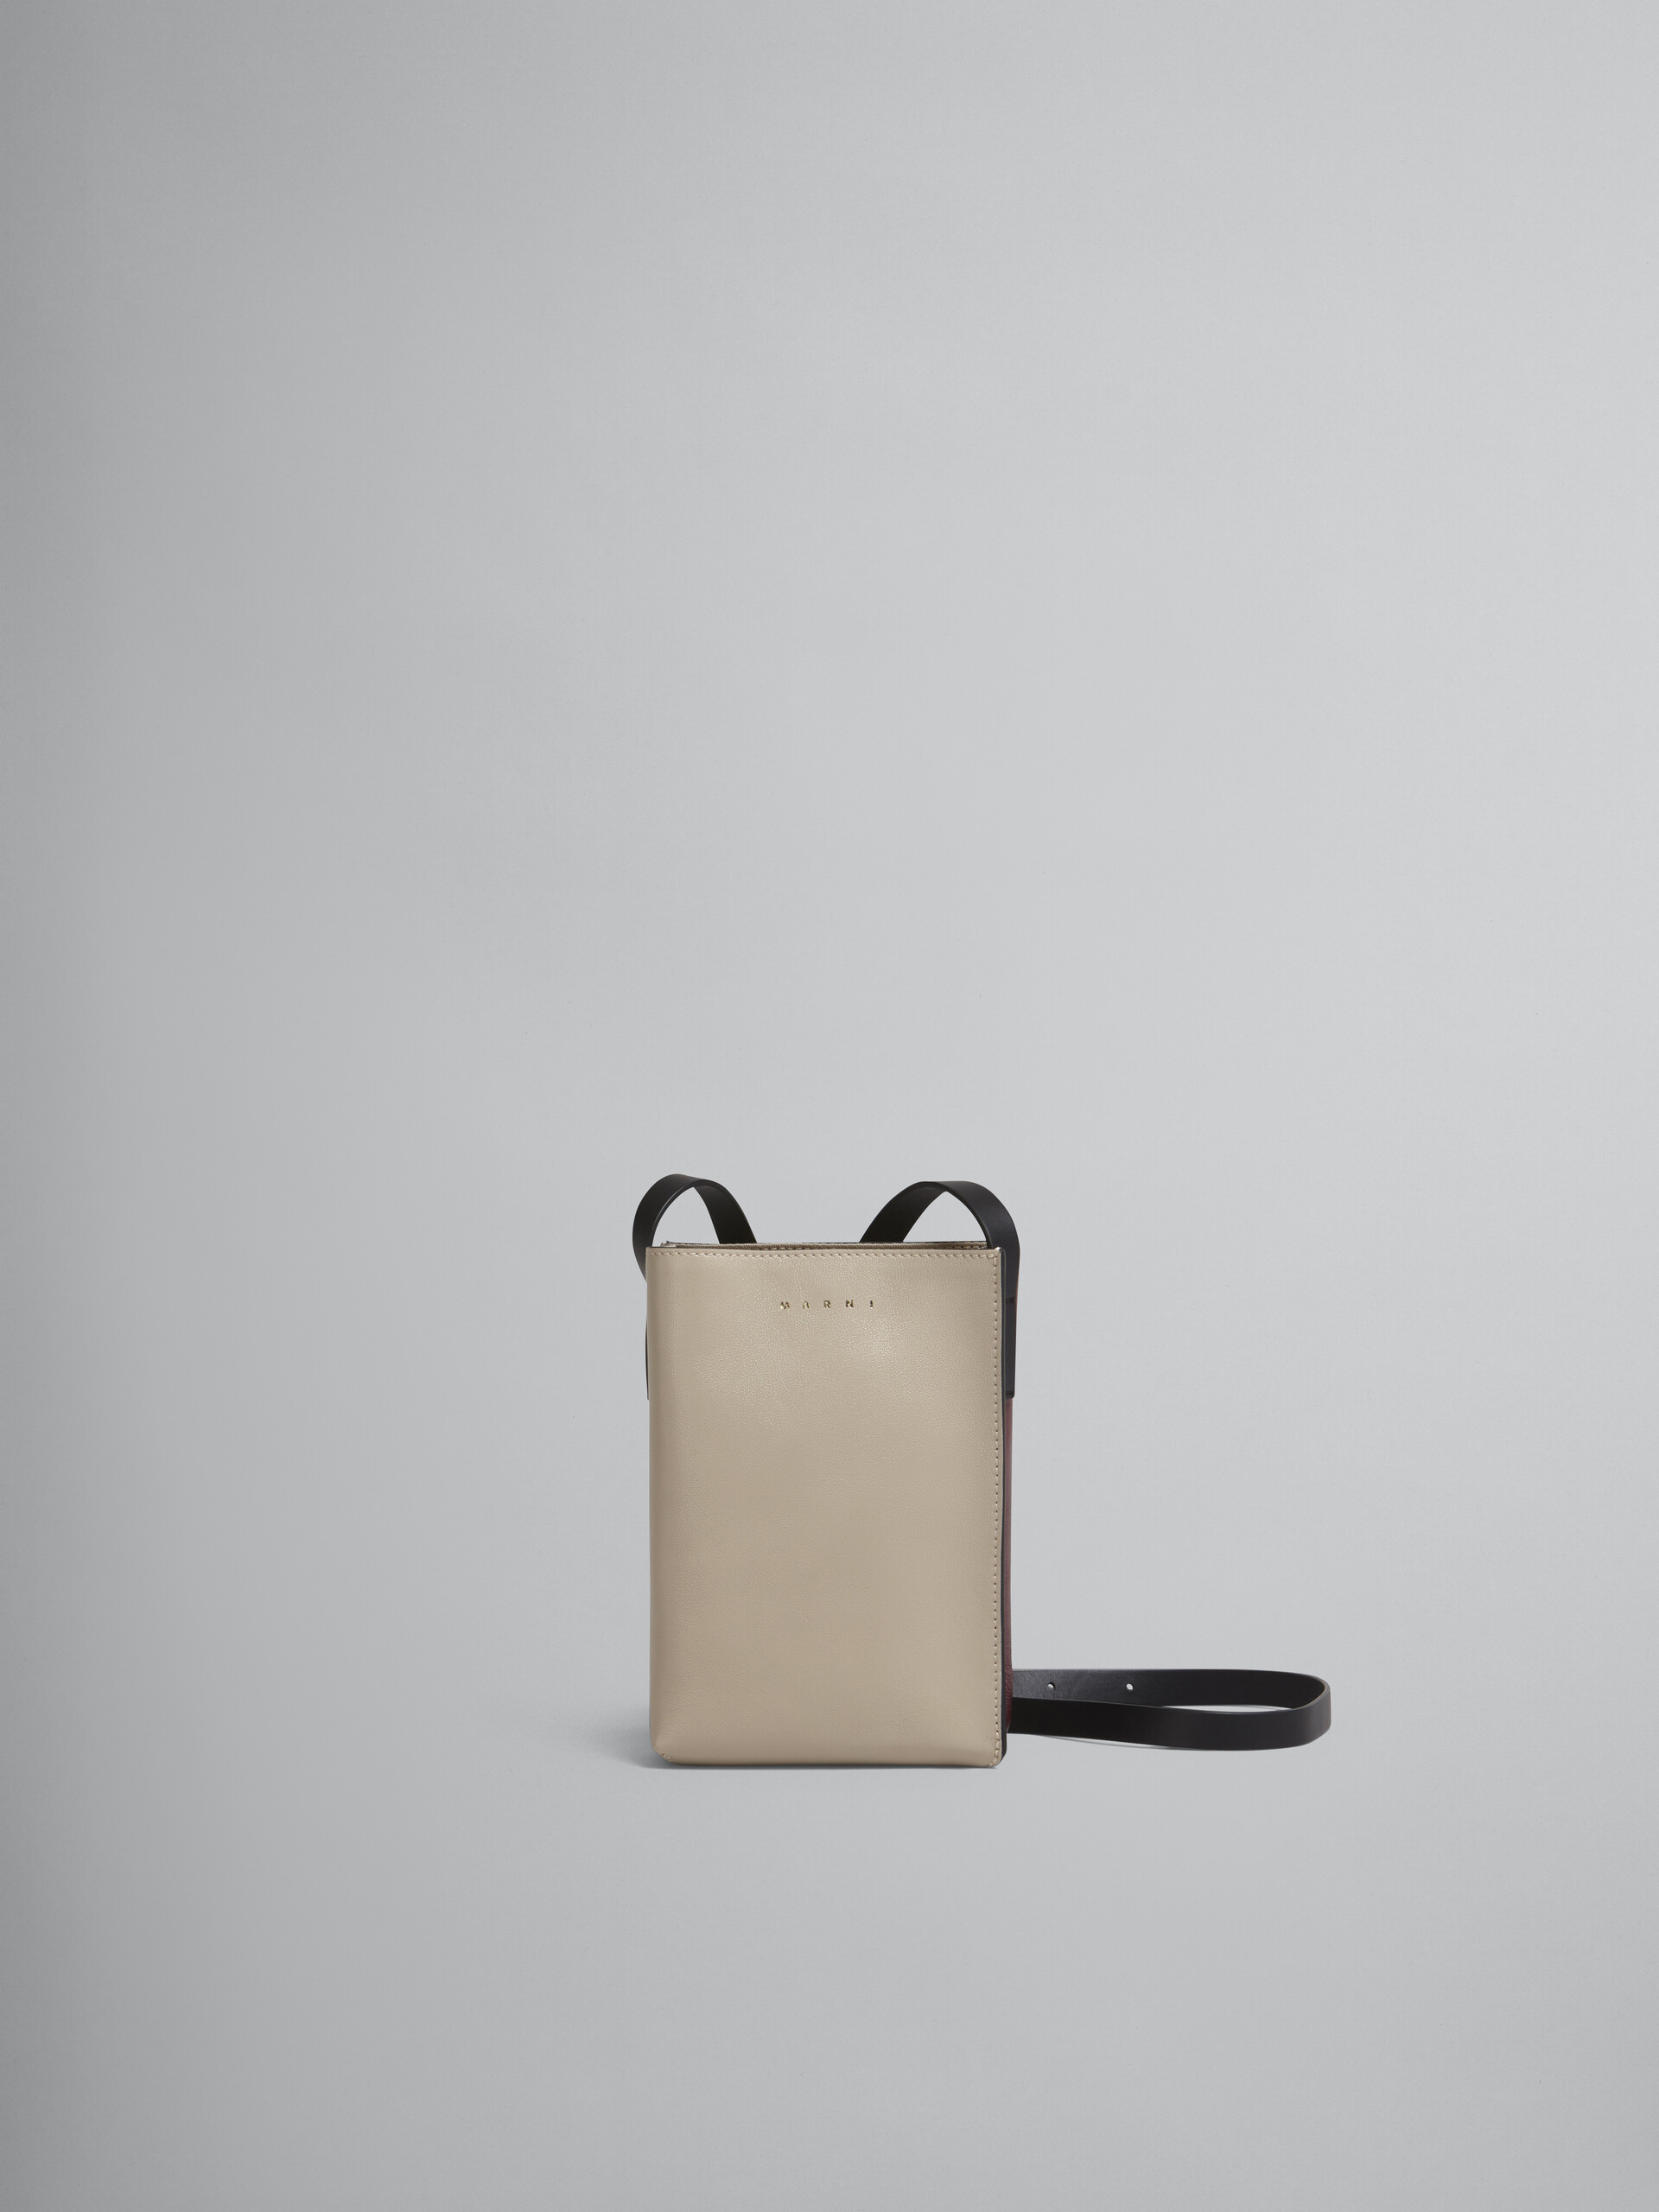 MUSEO SOFT bag in beige and red tumbled calf - Shoulder Bags - Image 1